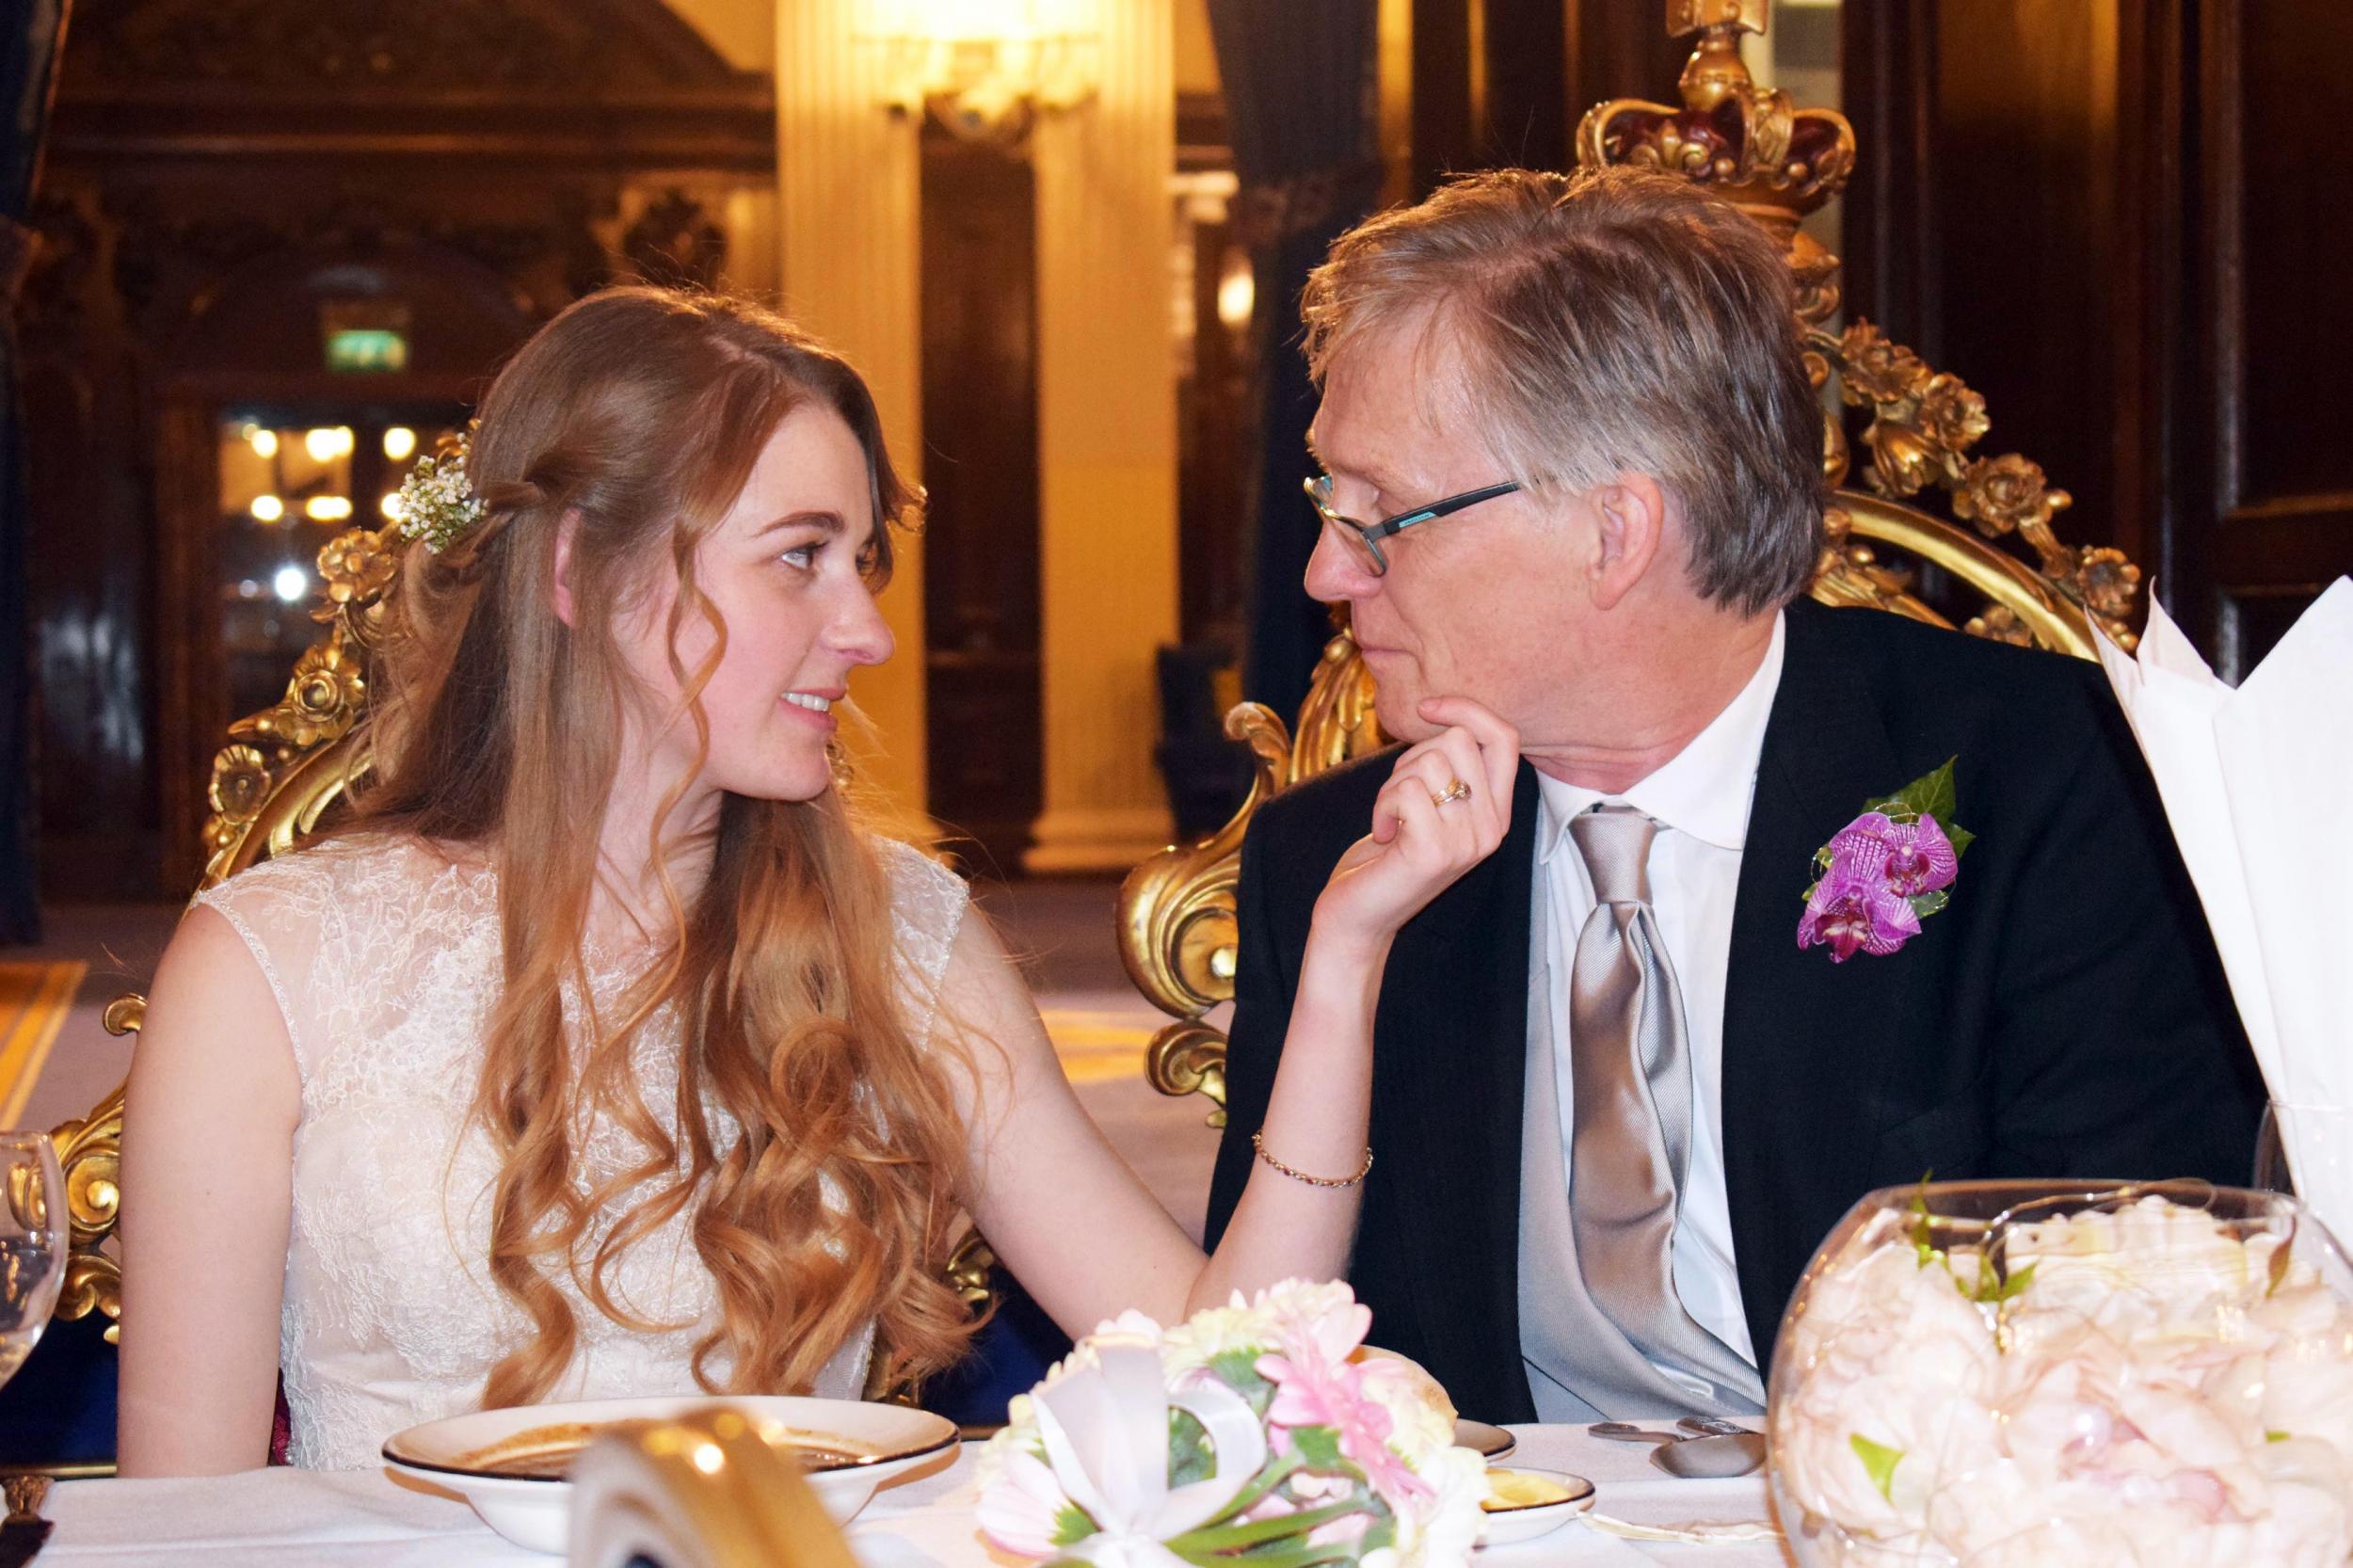 Dee, 24, and John, 59, who bonded over local government, prepare to tie the knot